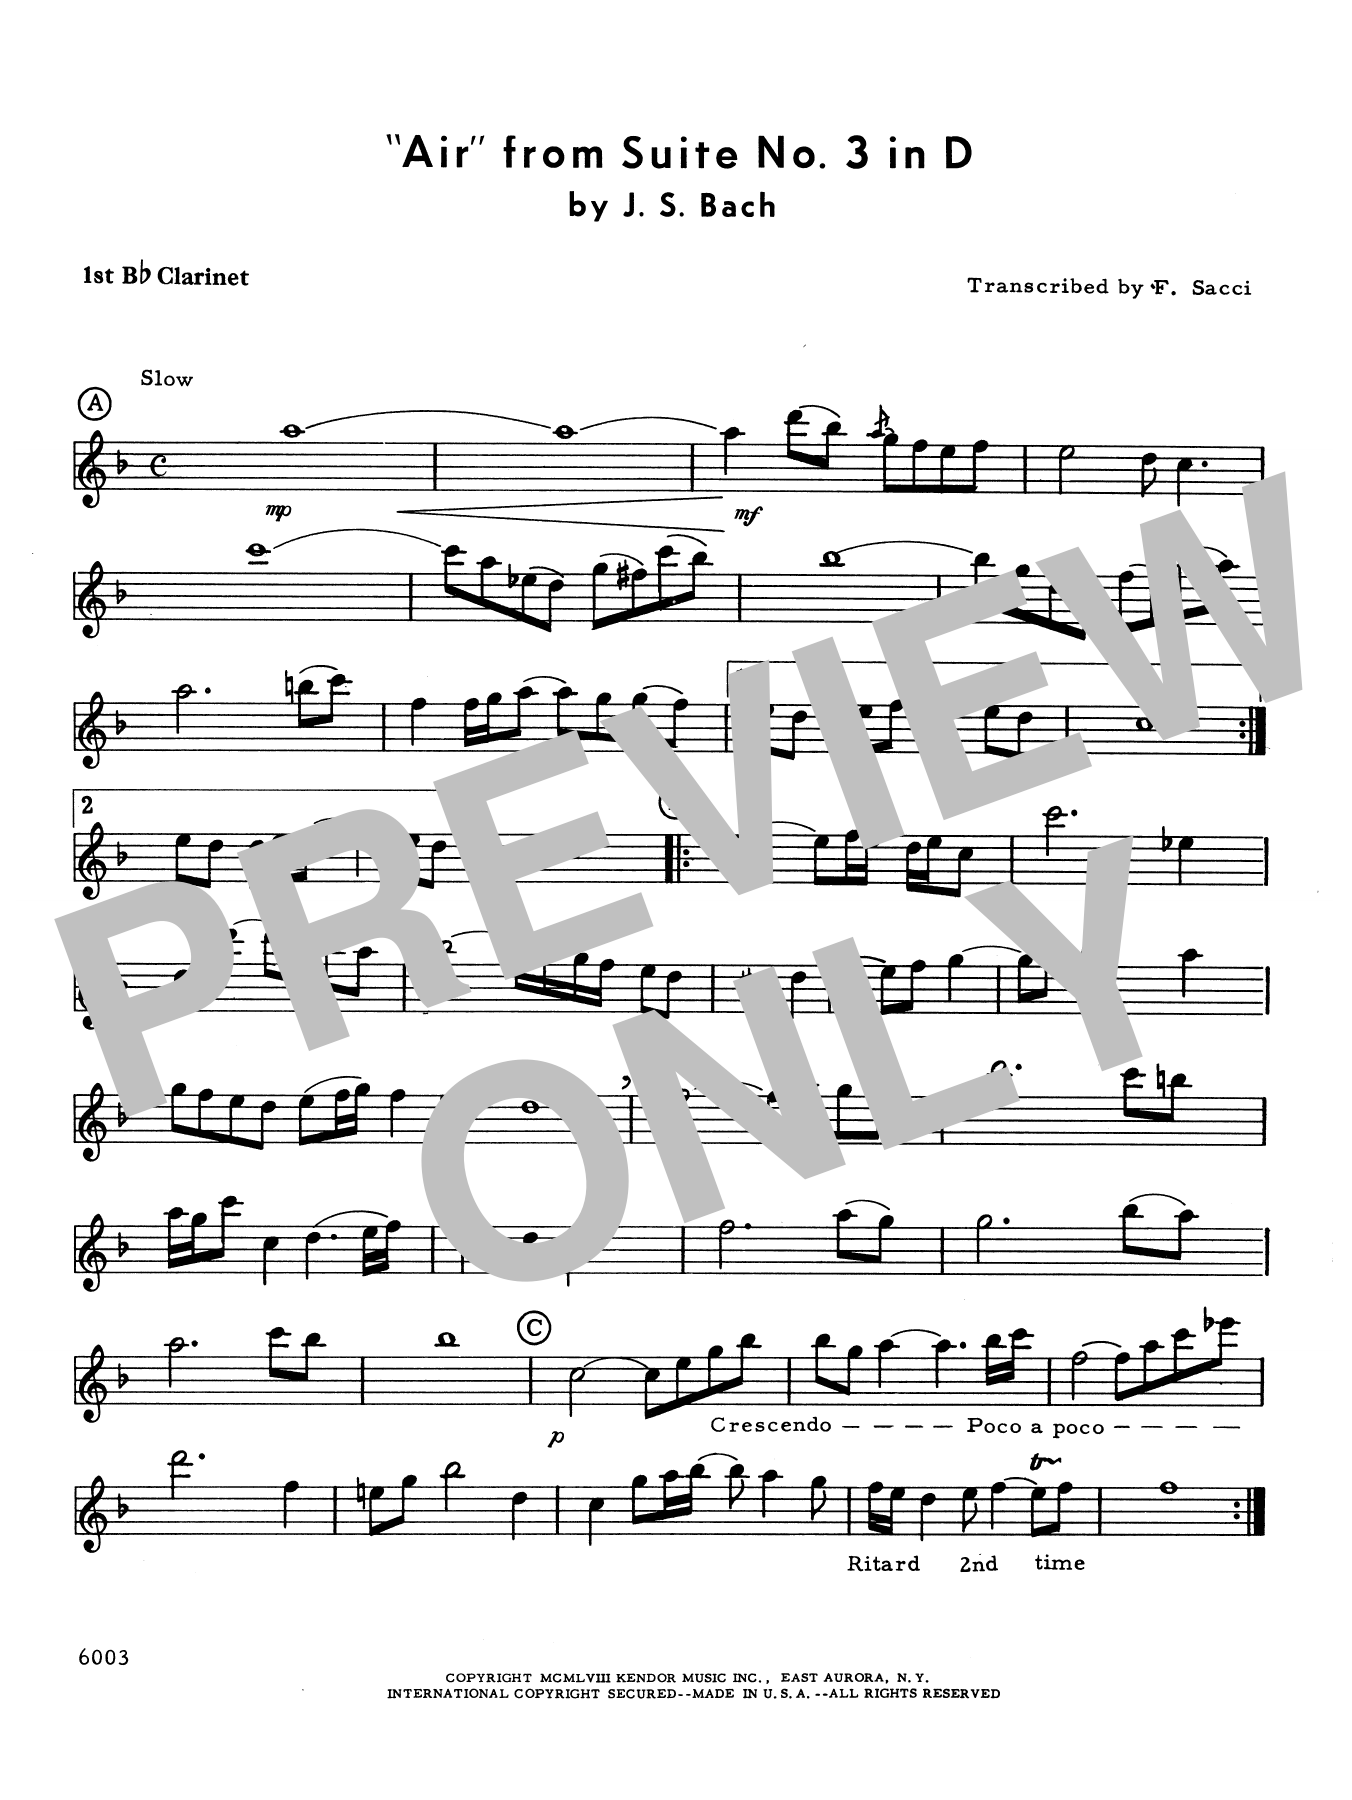 Download Frank J. Sacci Air From Suite #3 In D - 1st Bb Clarine Sheet Music